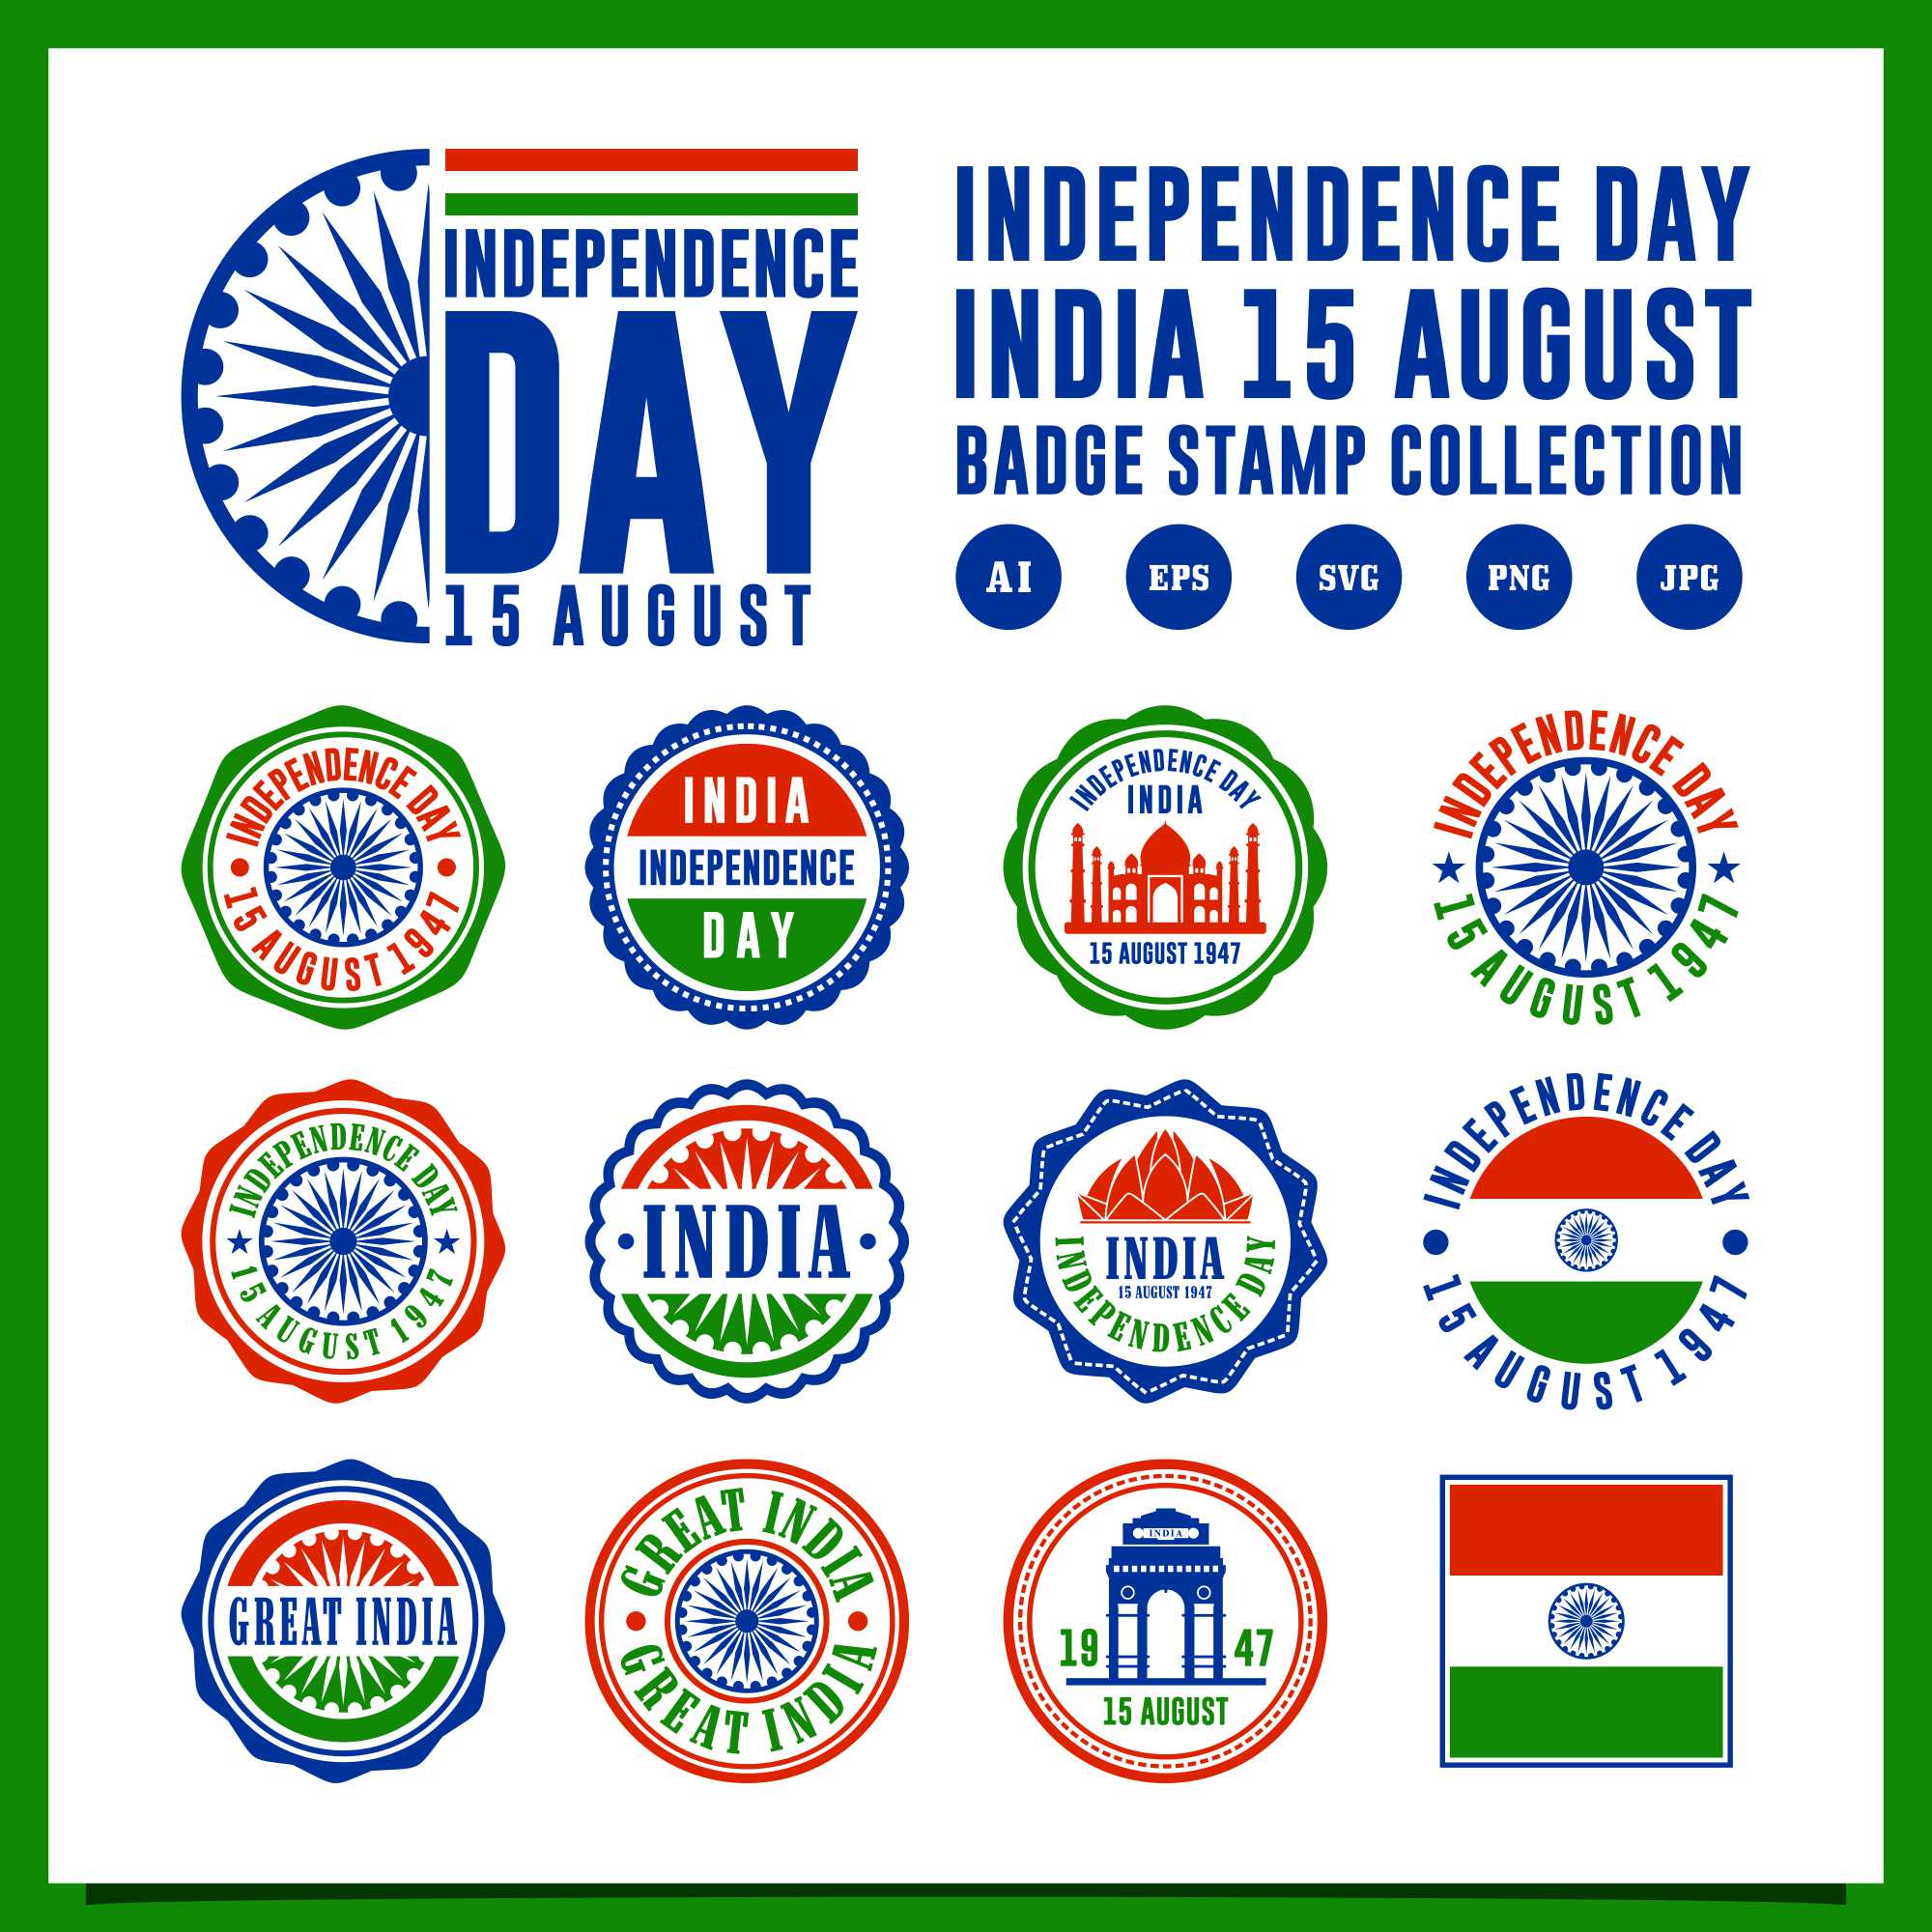 13 Independence day india 15 august badge stamps collection - $6 cover image.